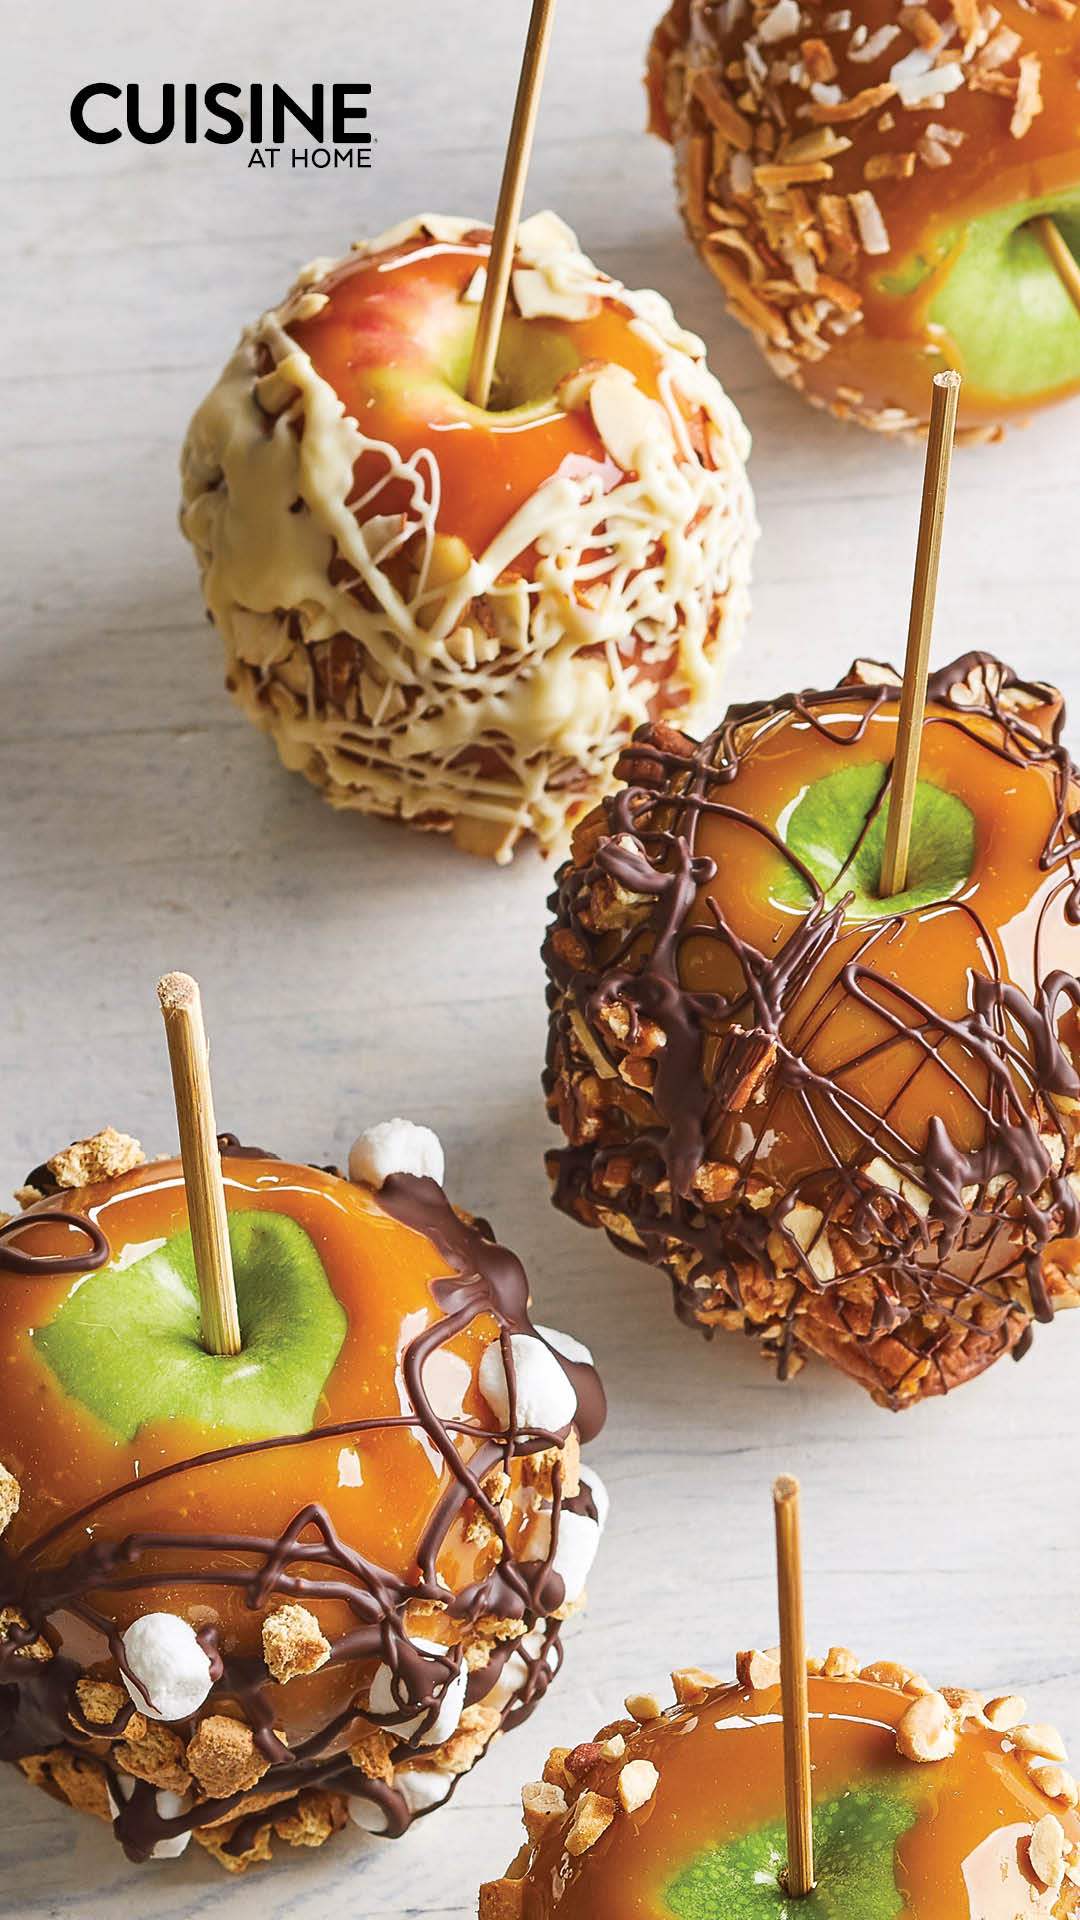 Free Mobile Wallpaper - October 2021 - Cuisine at Home - Halloween cooking food fall aesthetic treats snacks homemade caramel apples - iPhone iOS Android